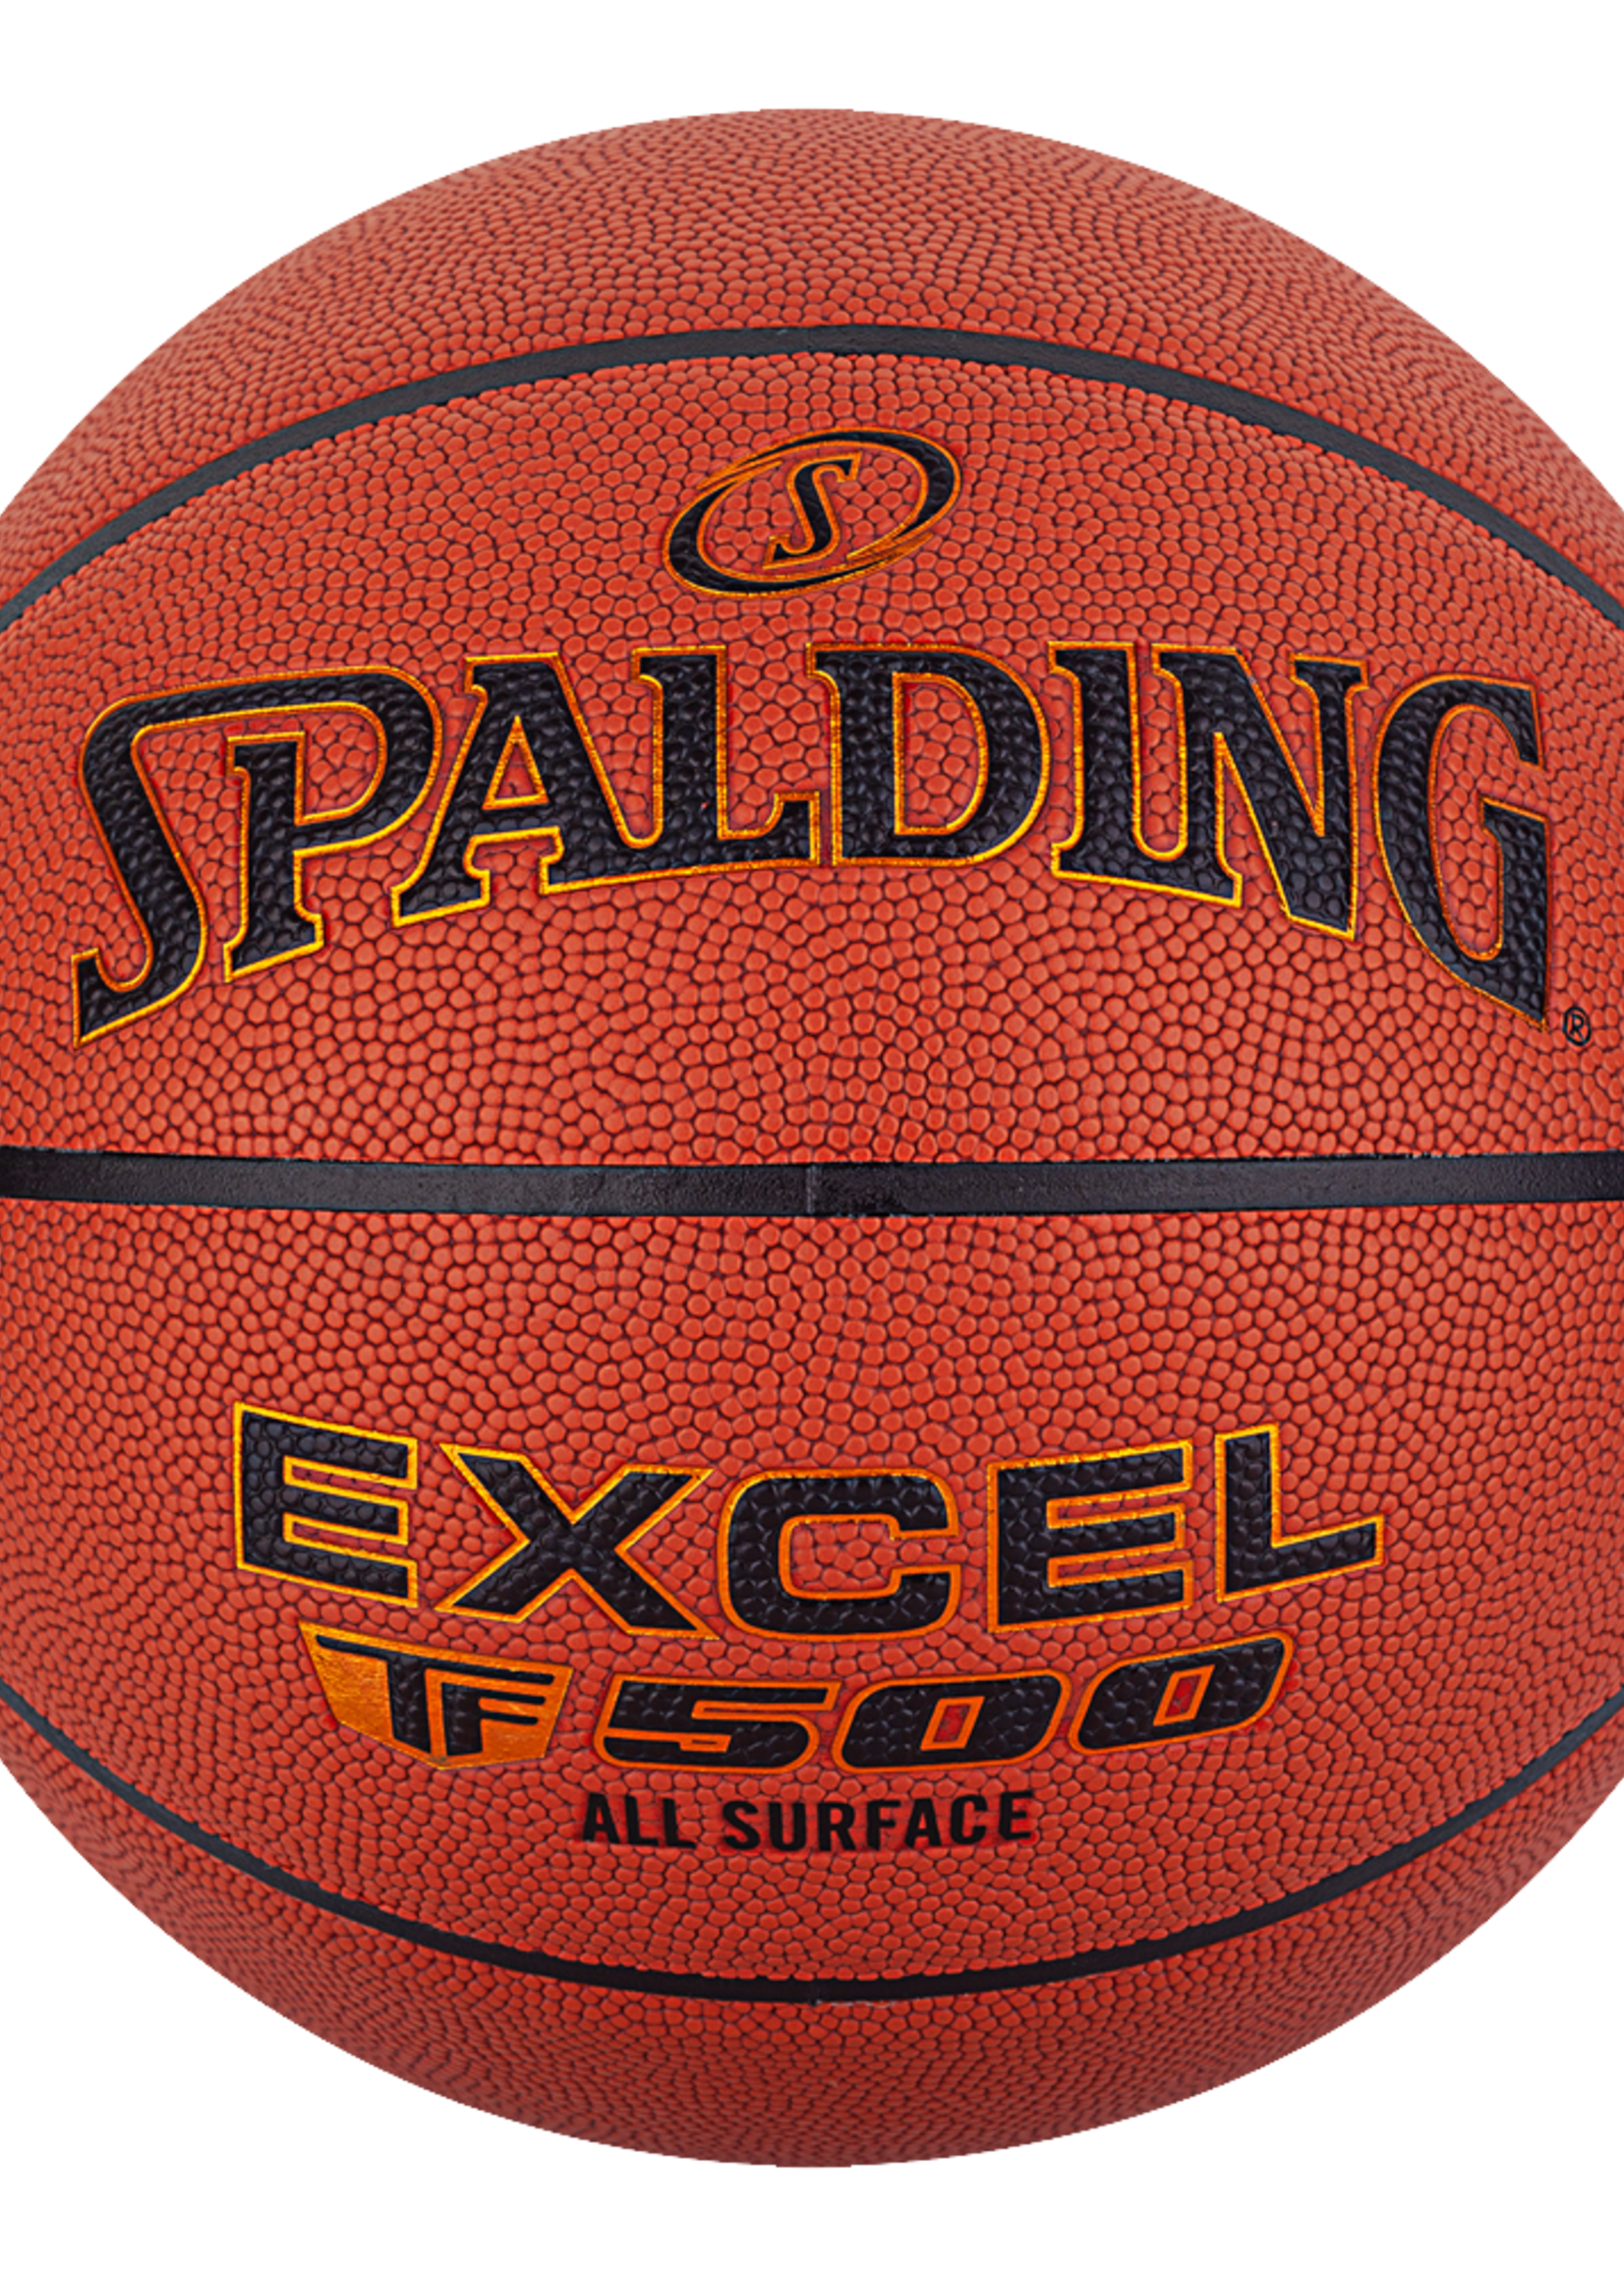 Spalding Excel TF-500 All-Surface-Basketball